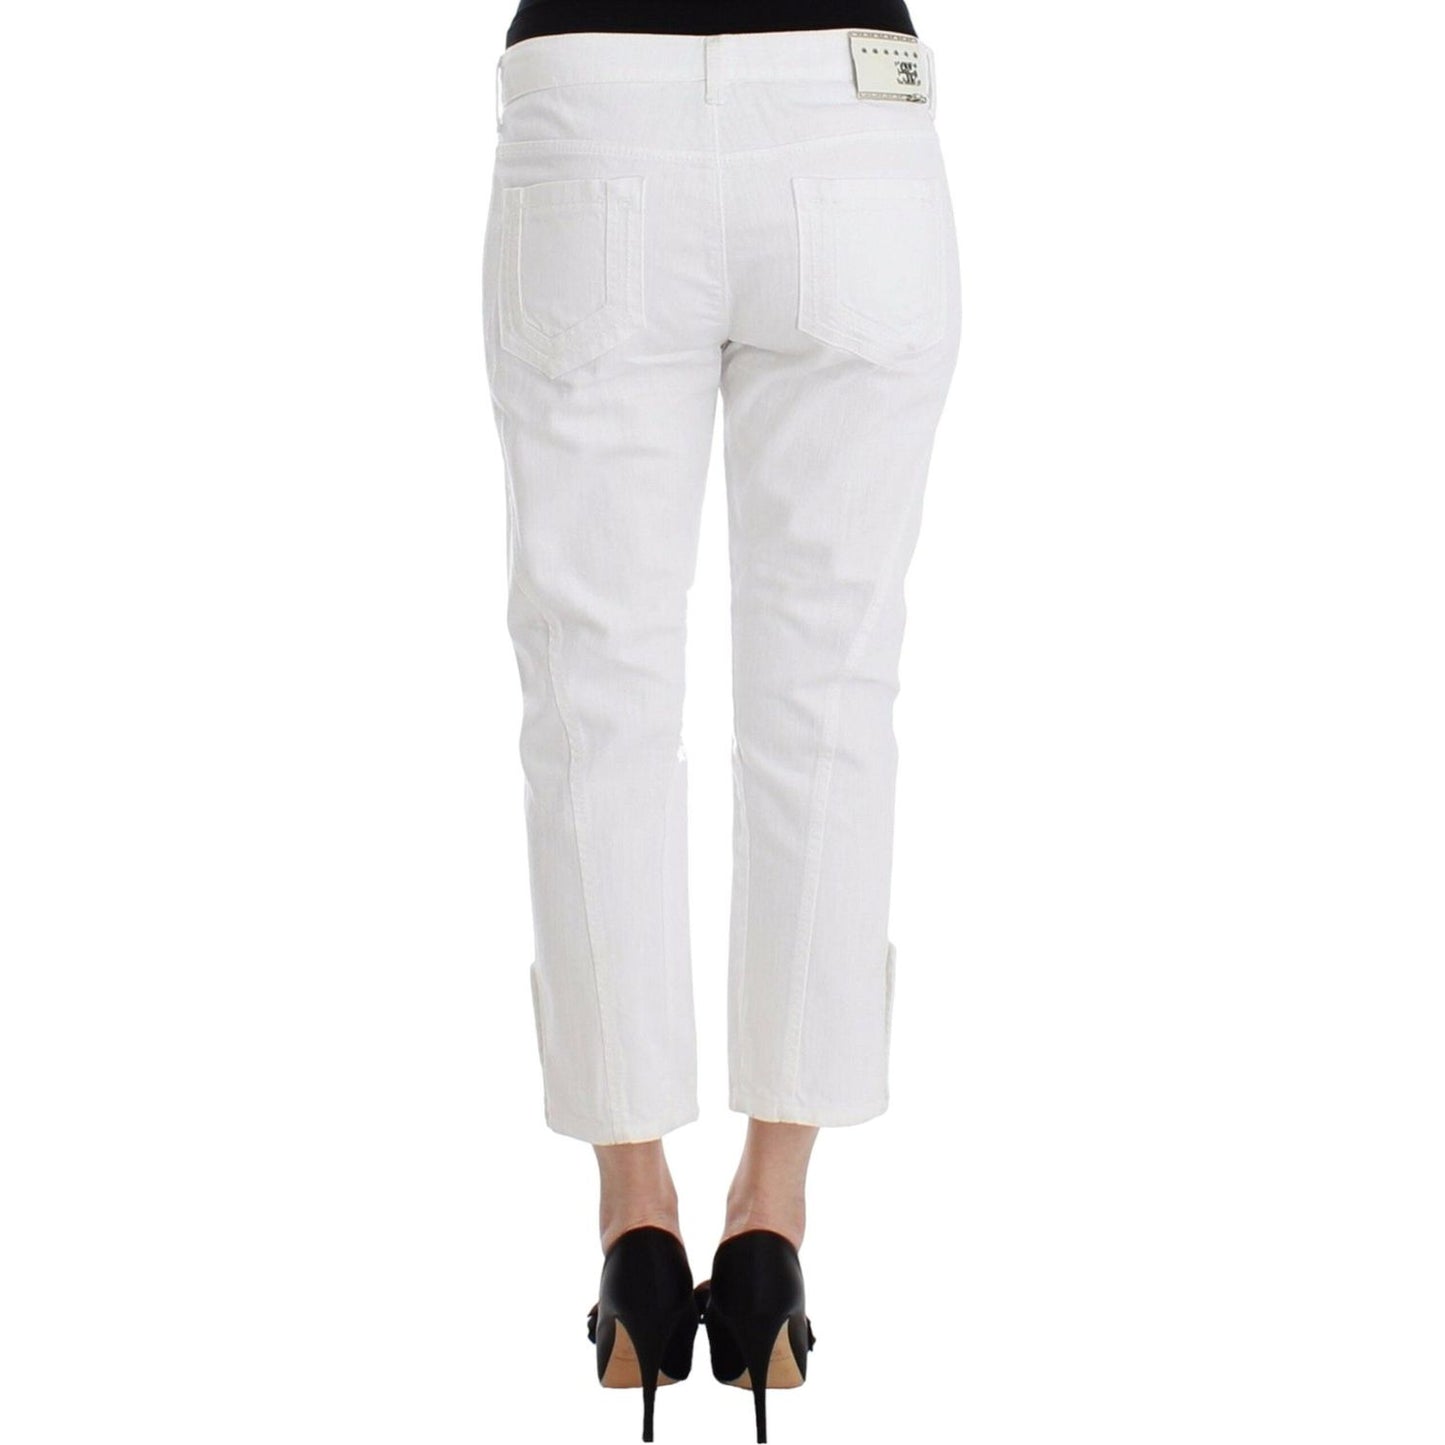 Ermanno Scervino | Chic White Cropped Jeans for Sophisticated Style| McRichard Designer Brands   